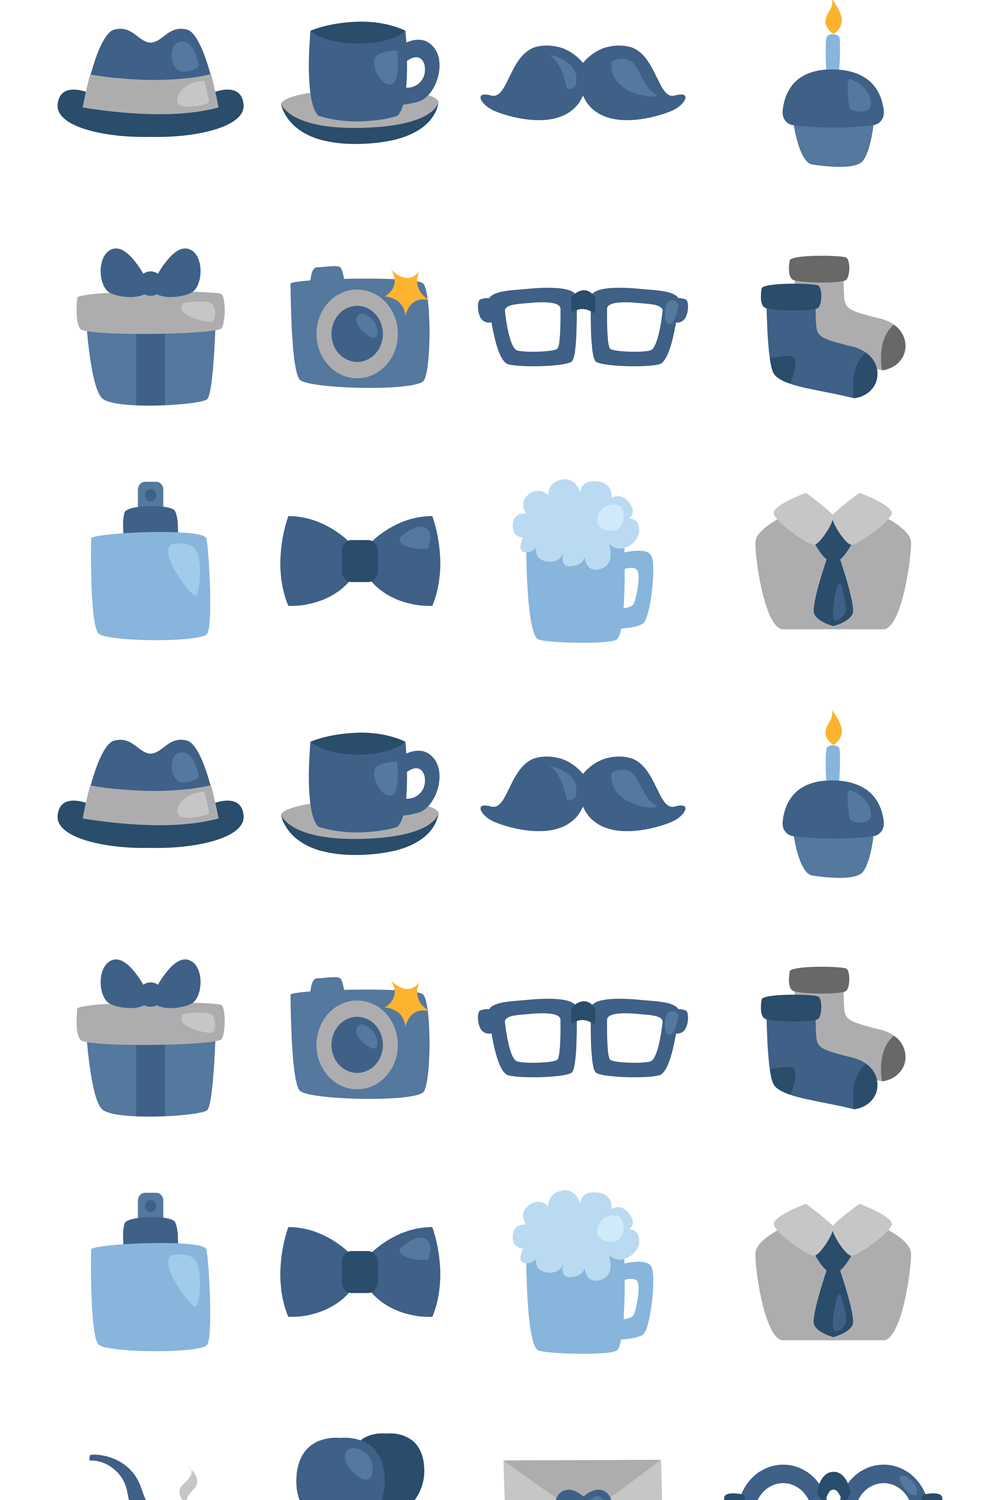 Illustrations fathers day icons set pinterest.